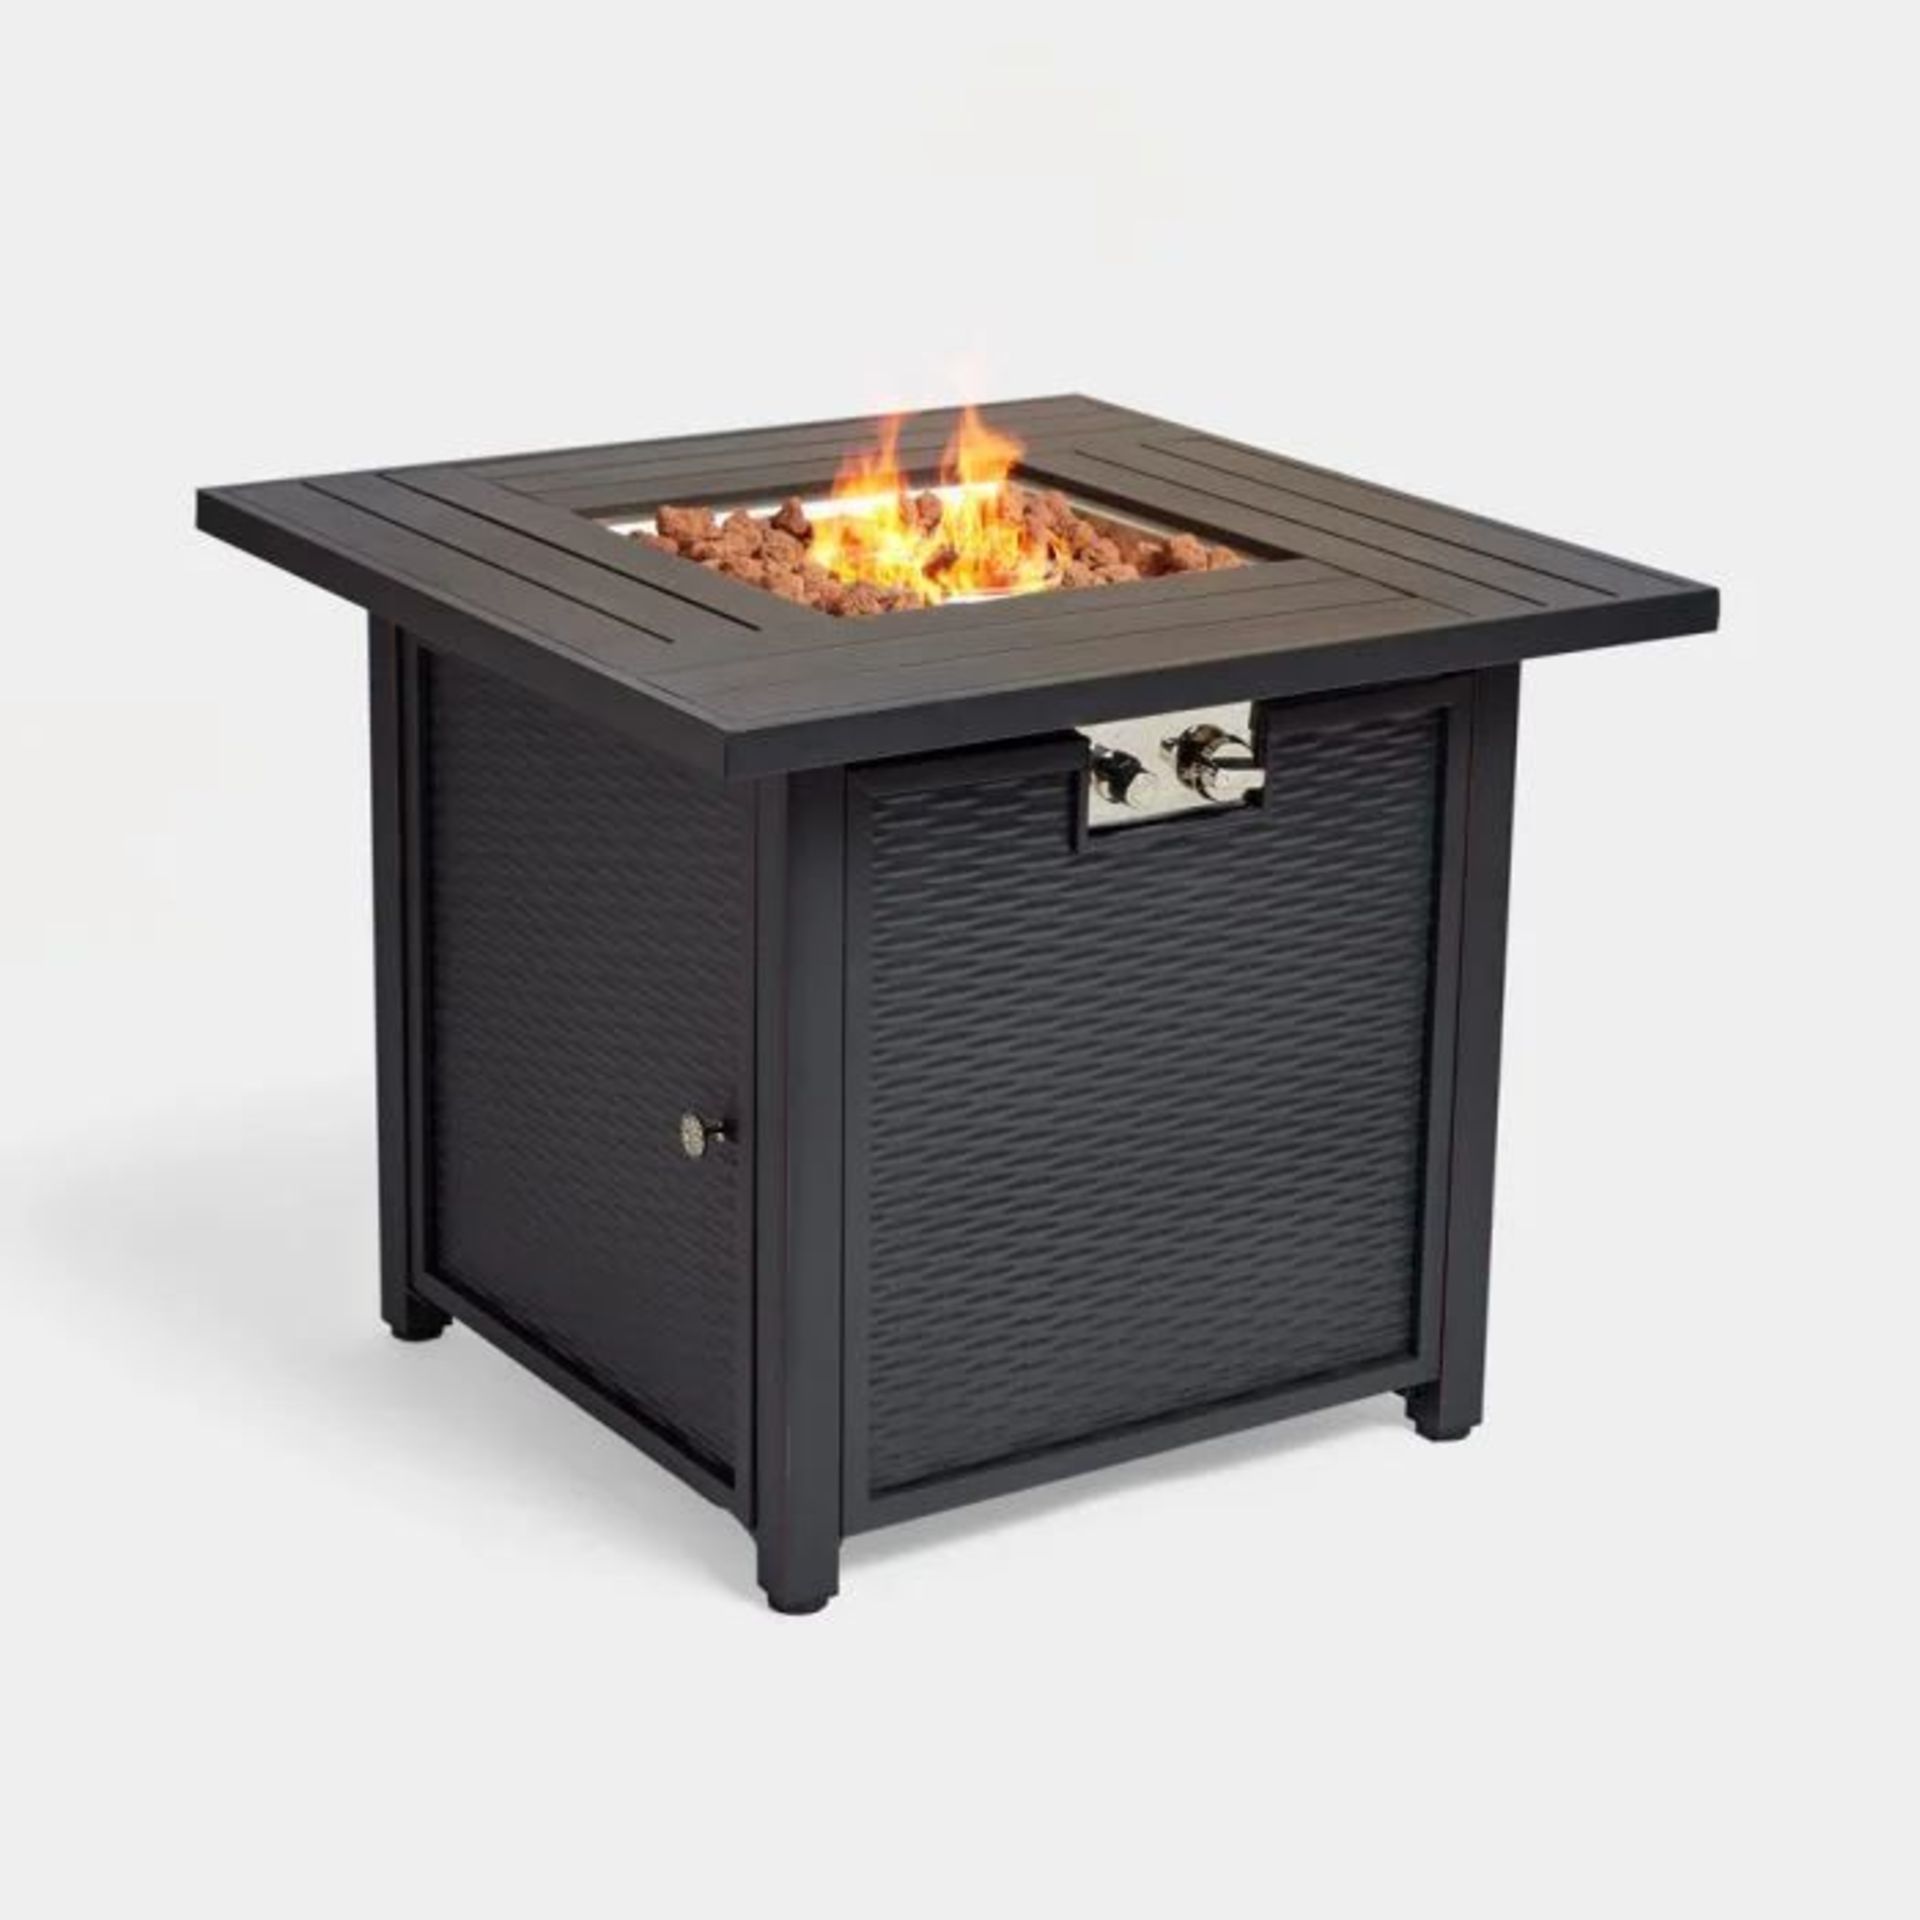 GAS FIREPIT TABLE RATTAN AND STEEL BUILD ADJUSTABLE FLAME R5-1